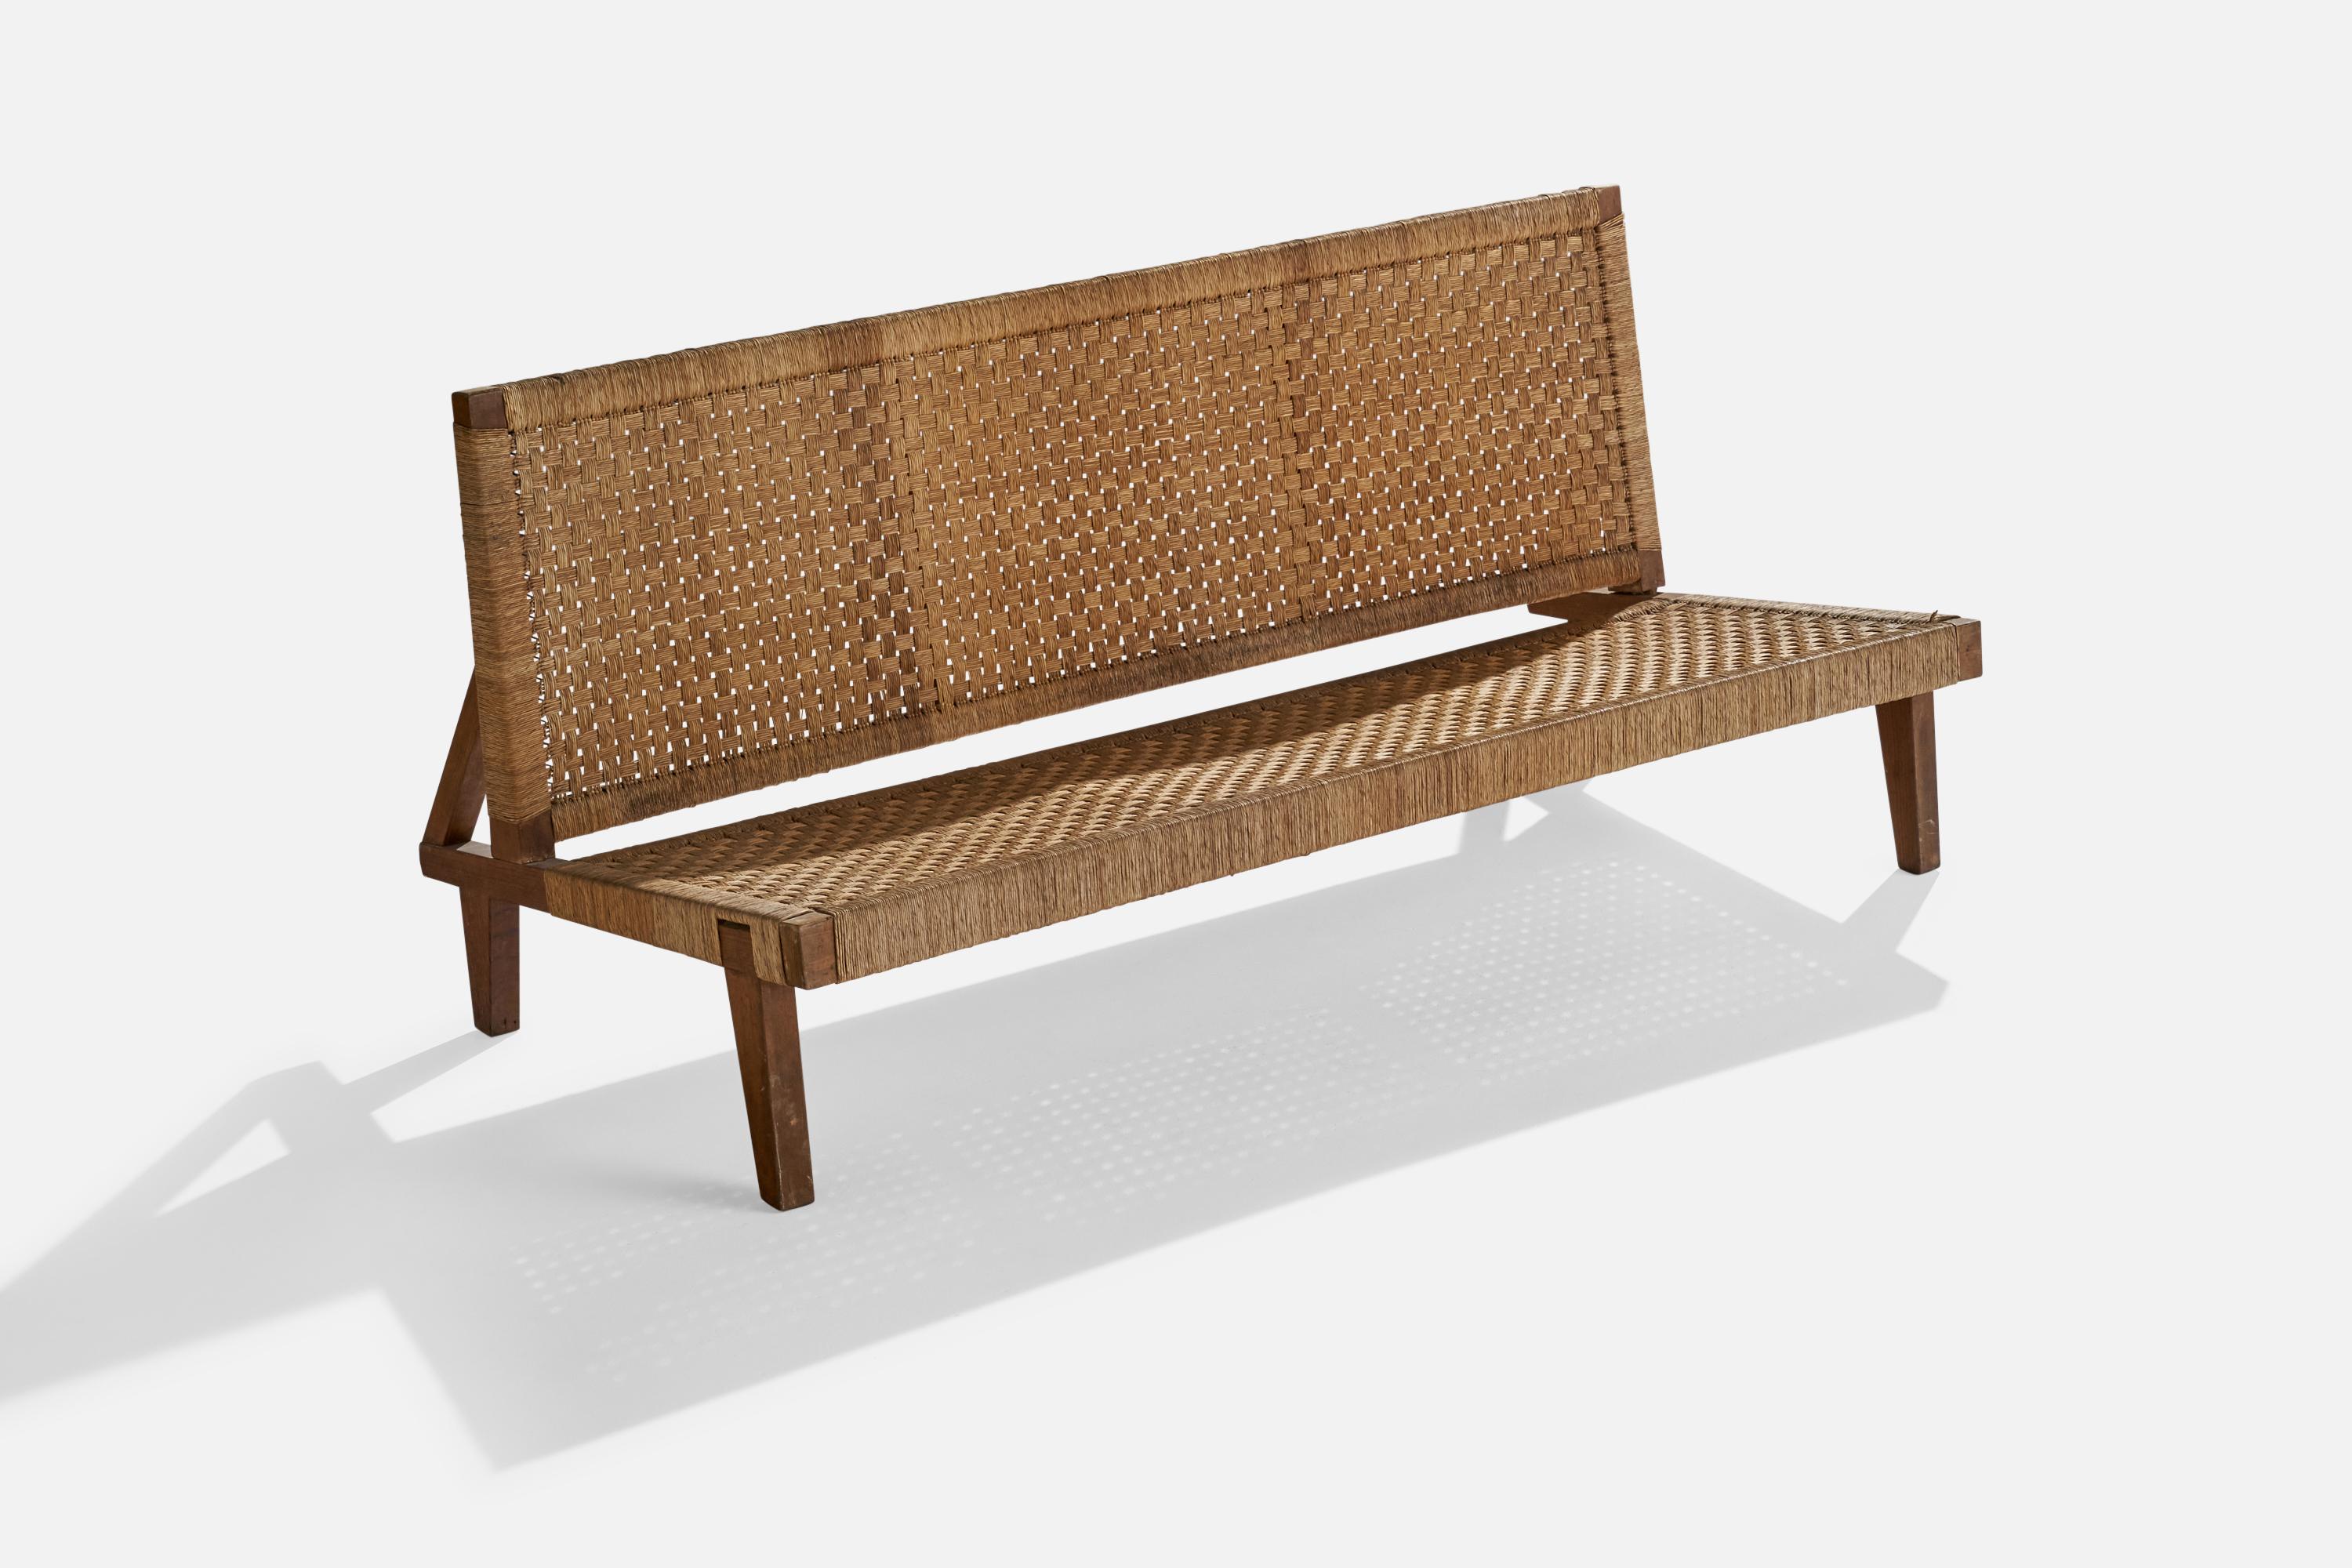 A walnut and rattan bench designed and produced in the US, 1950s.

seat height 14”.